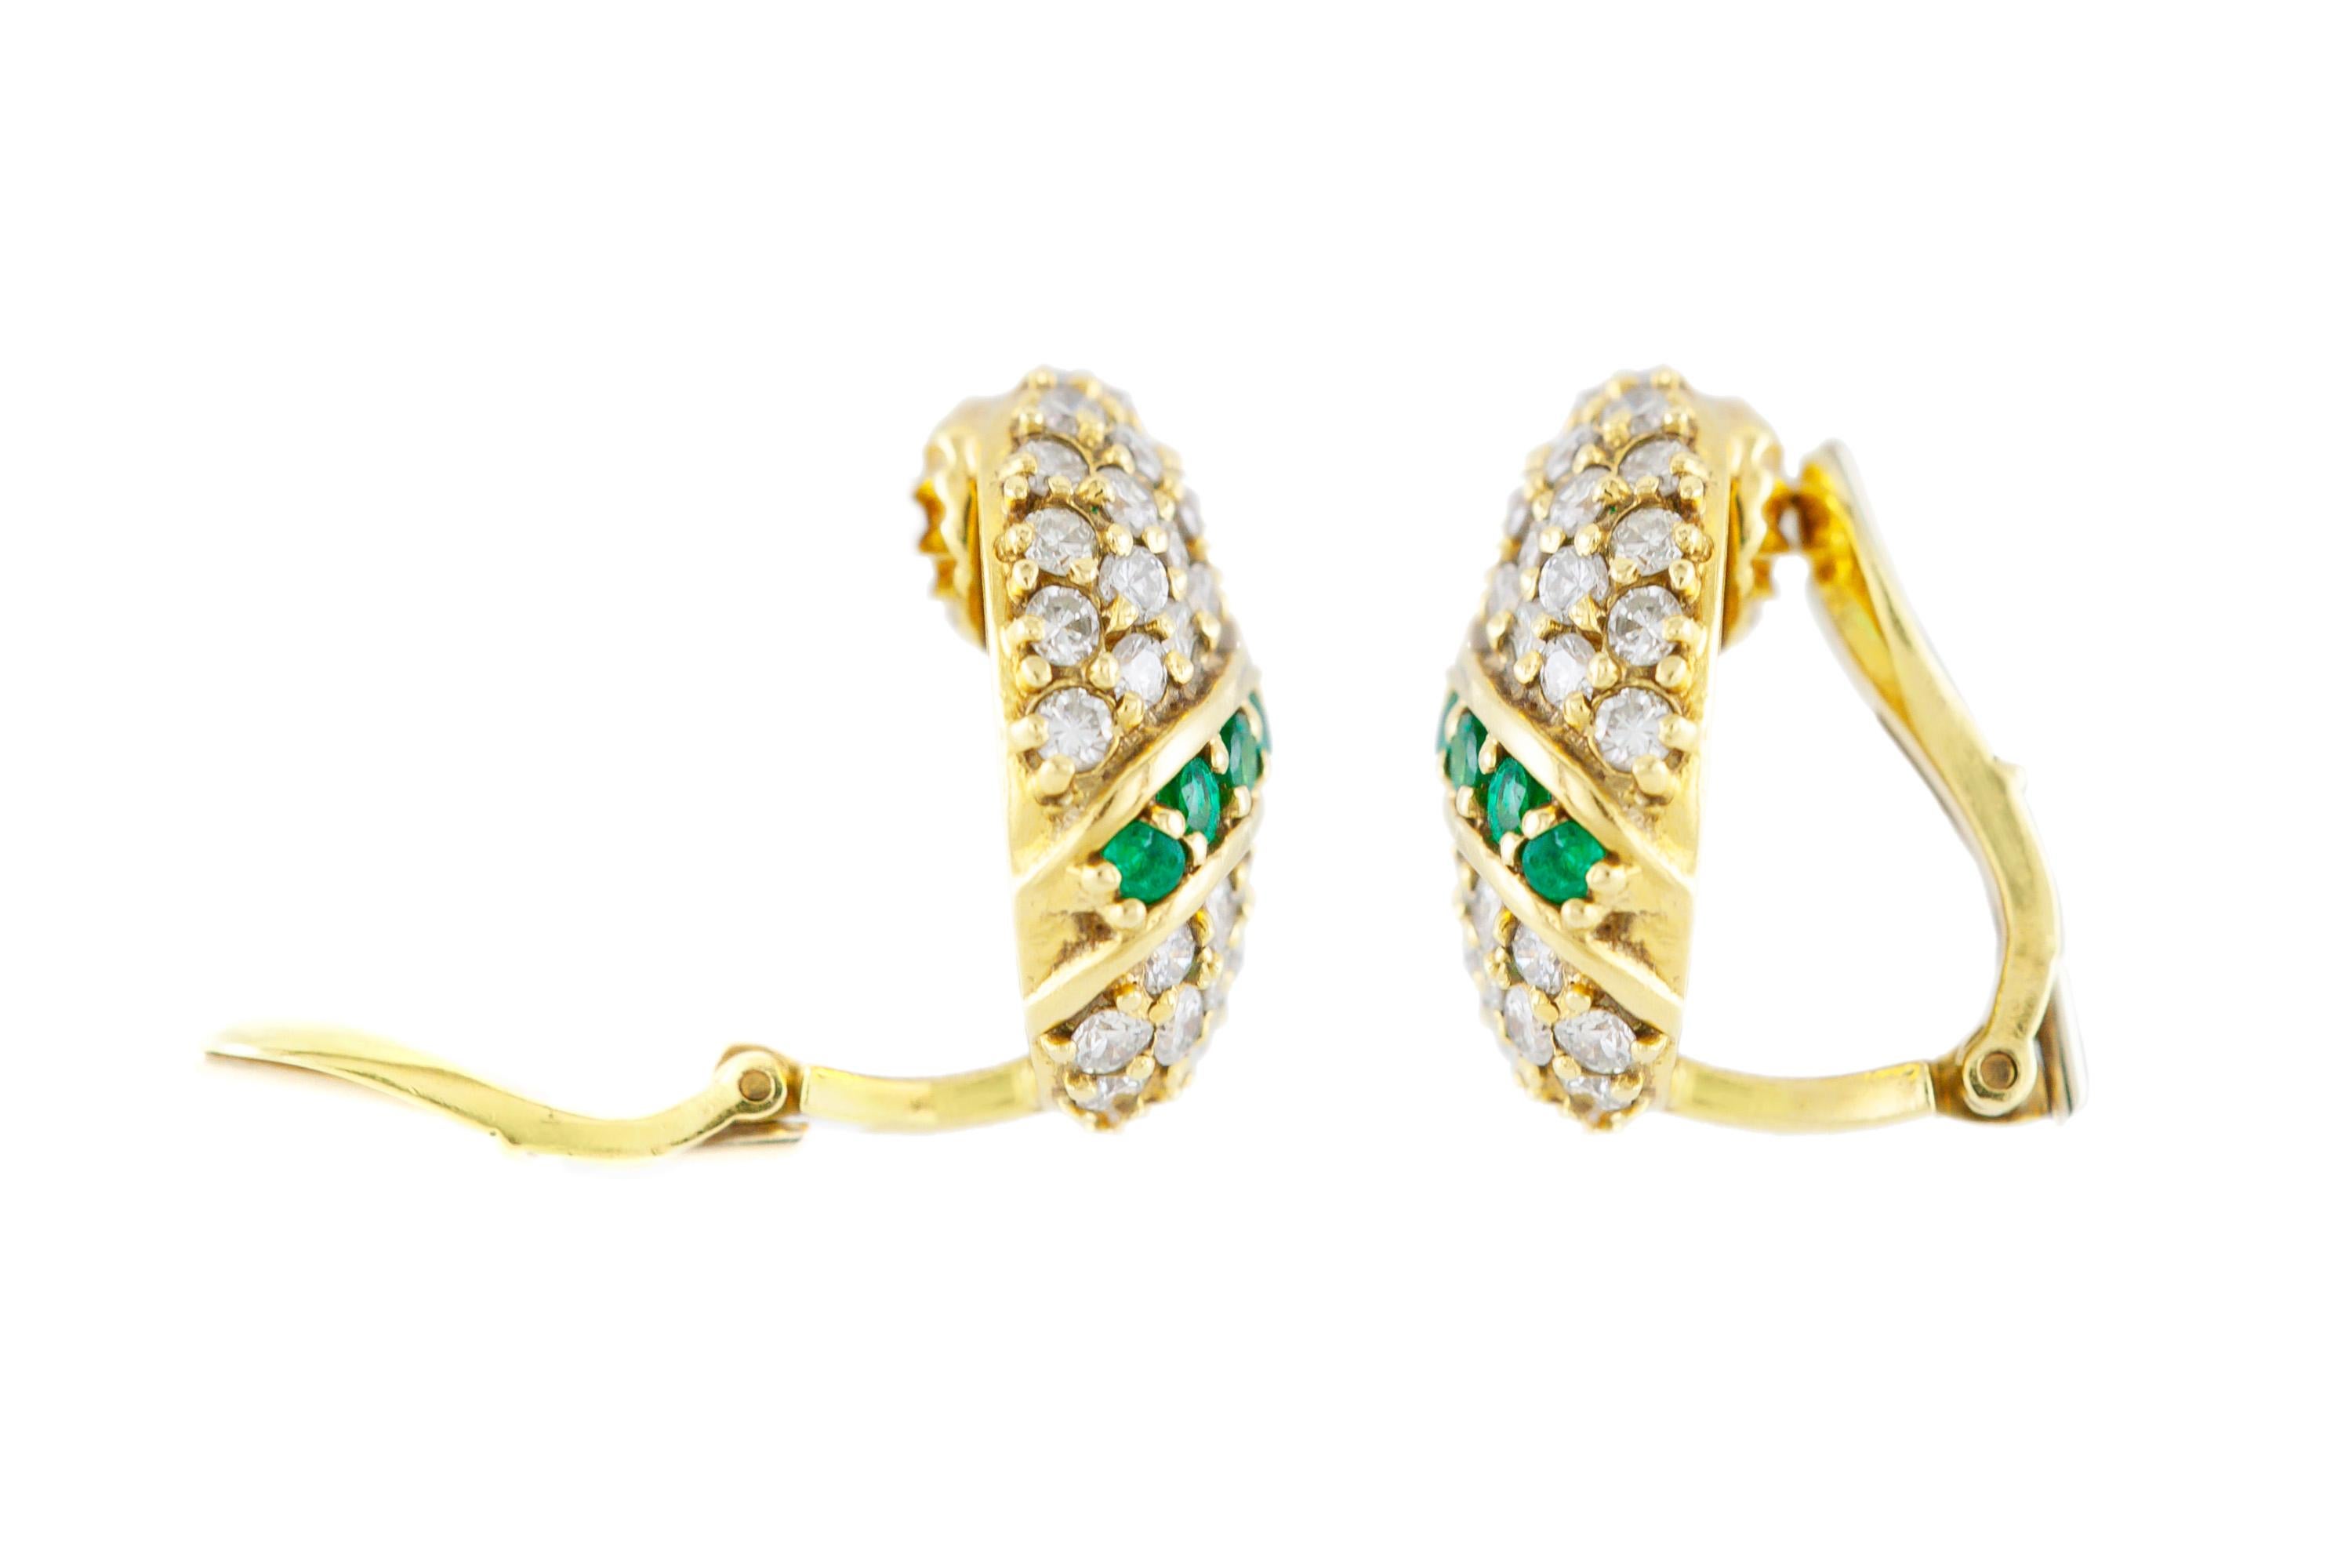 The clip-on earrings are finely crafted in 18k yellow gold with diamonds weighing approximately a total of 2.14 and emeralds of 1.00 carat. 
Circa 1930.

